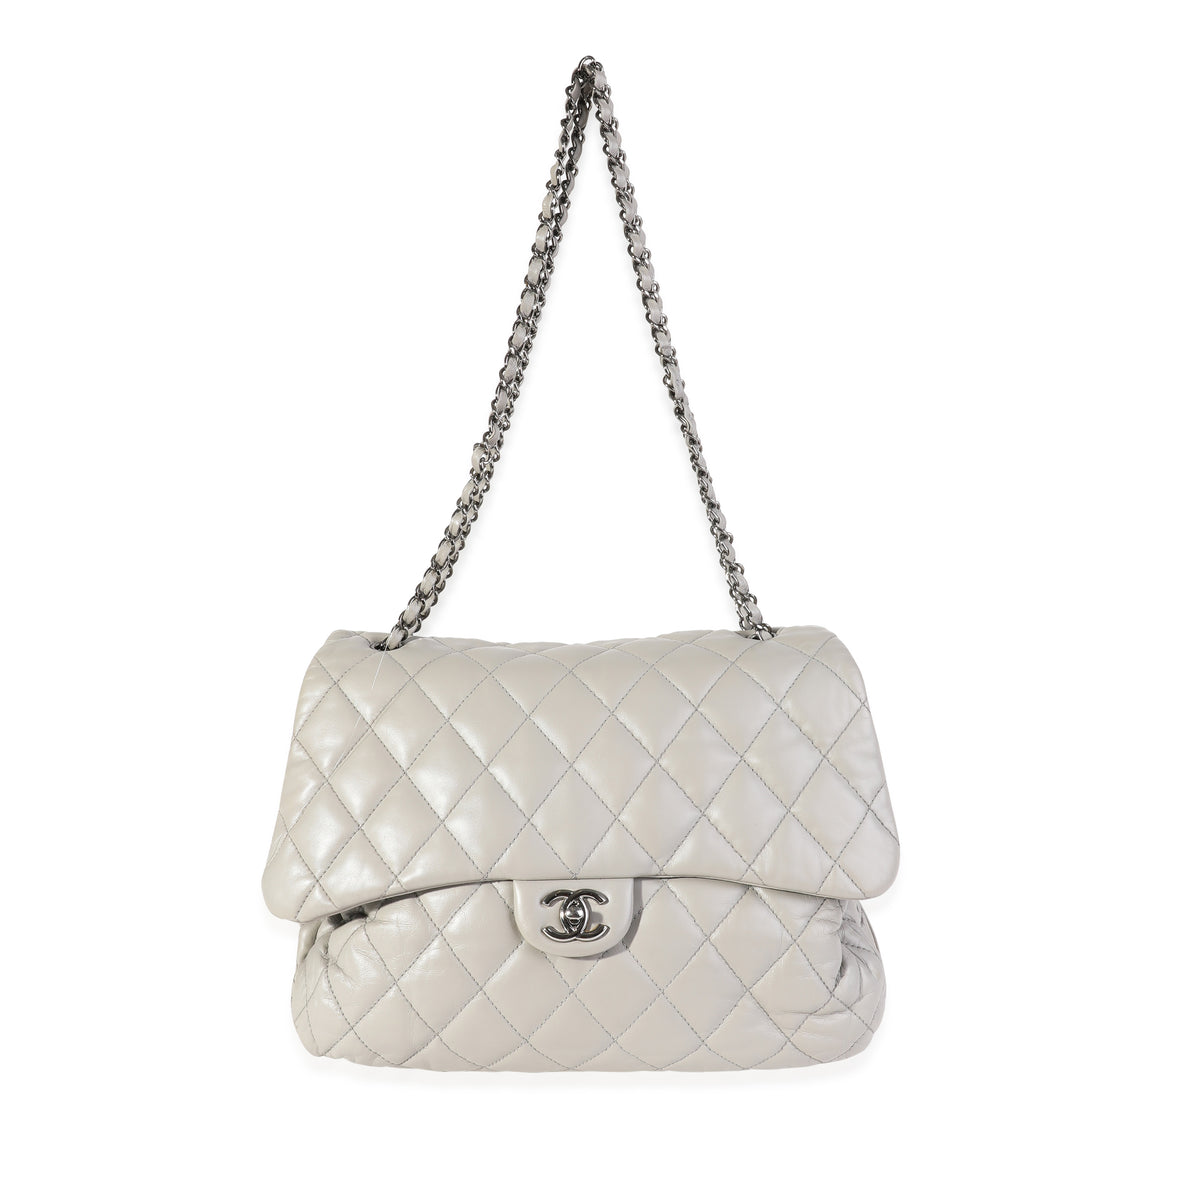 Chanel Gray Quilted Lambskin 3 Accordion Maxi Flap Bag, myGemma